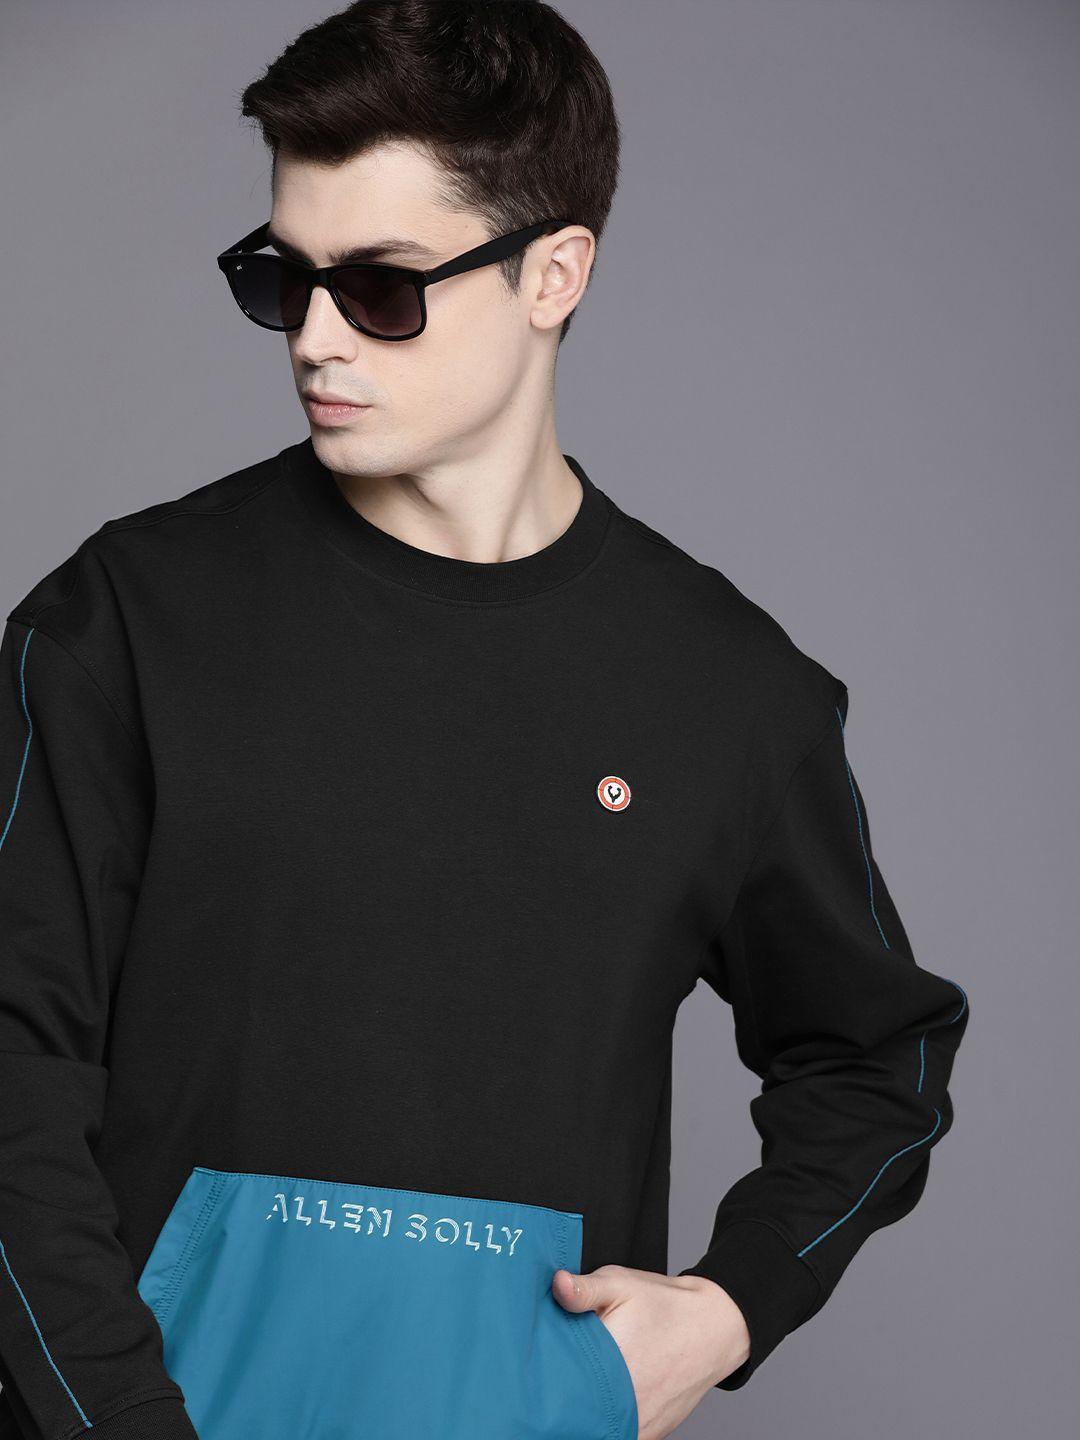 allen solly tribe round neck long sleeves sweatshirt with contrast kangaroo pocket